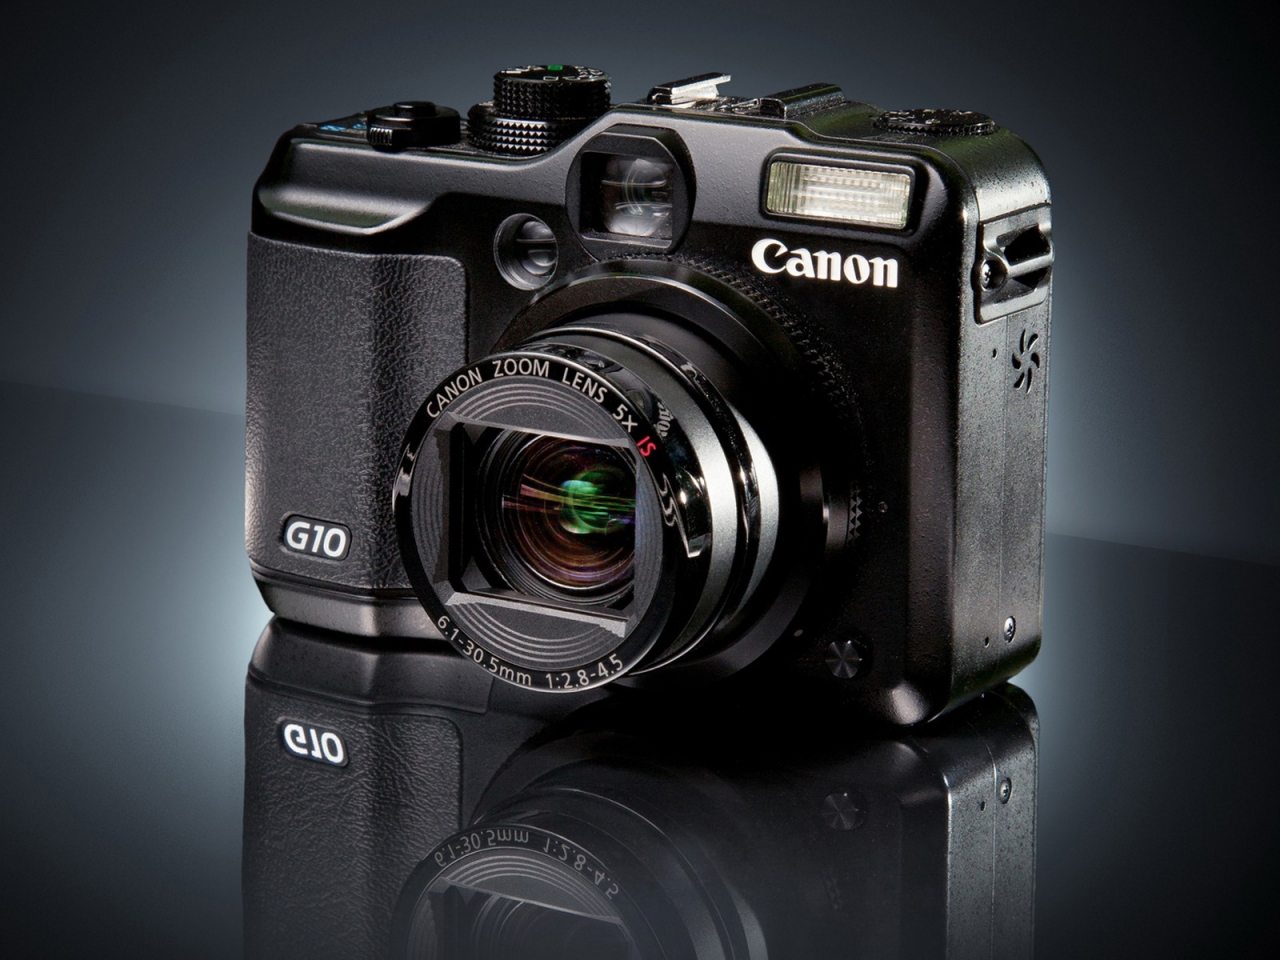 Canon G10 for 1280 x 960 resolution